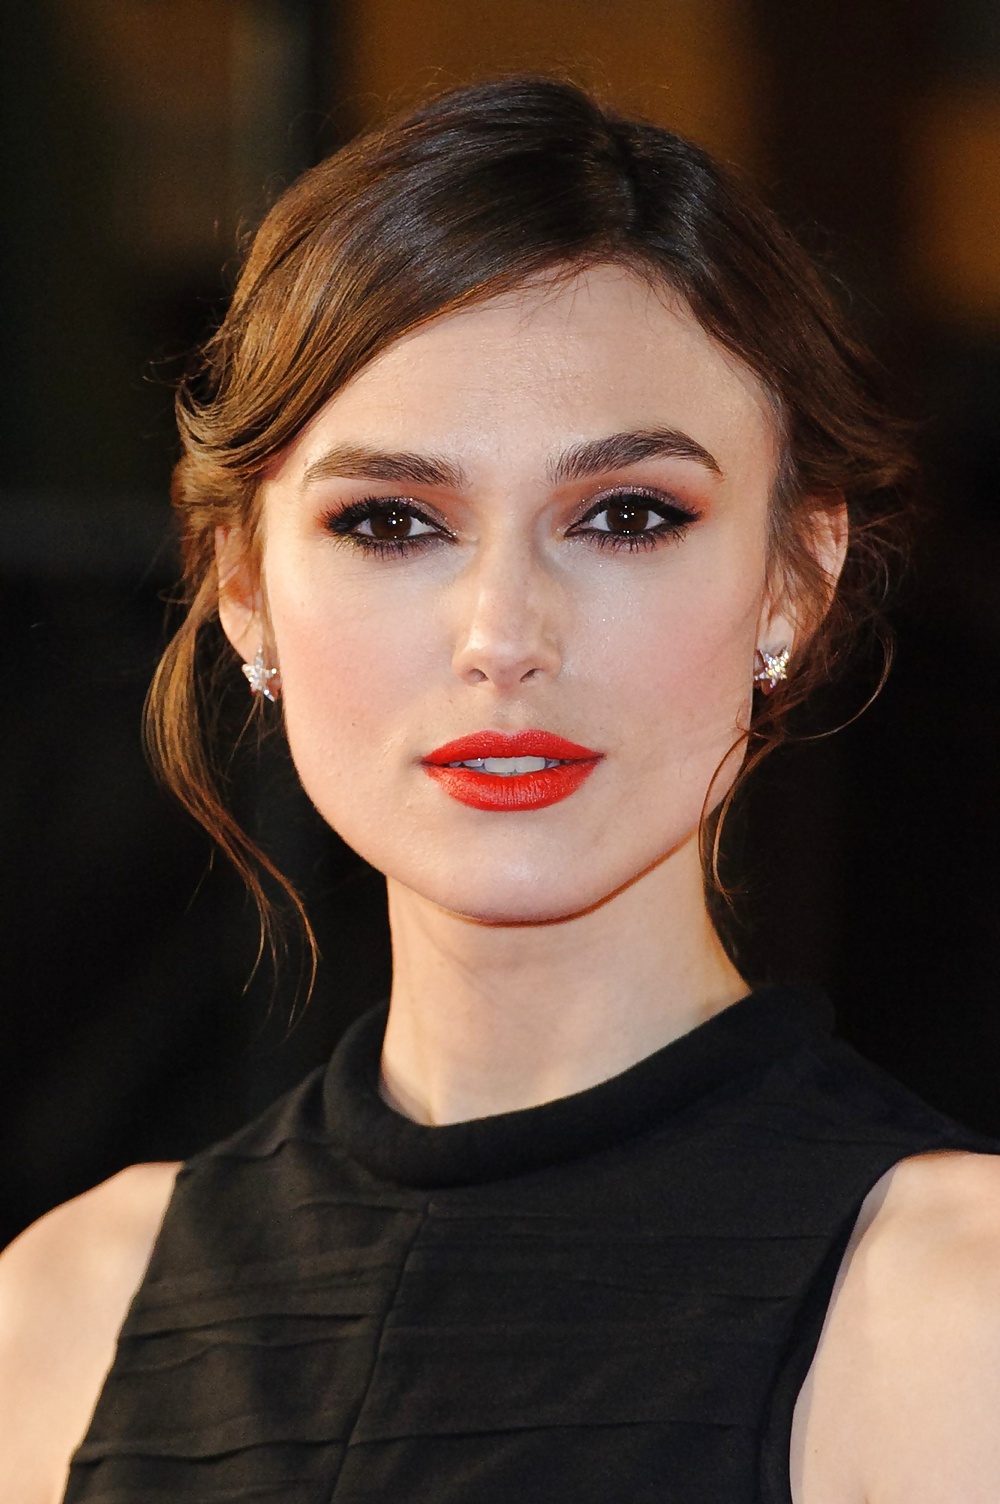 Keira Knightley The Royal Lady of England #35649600